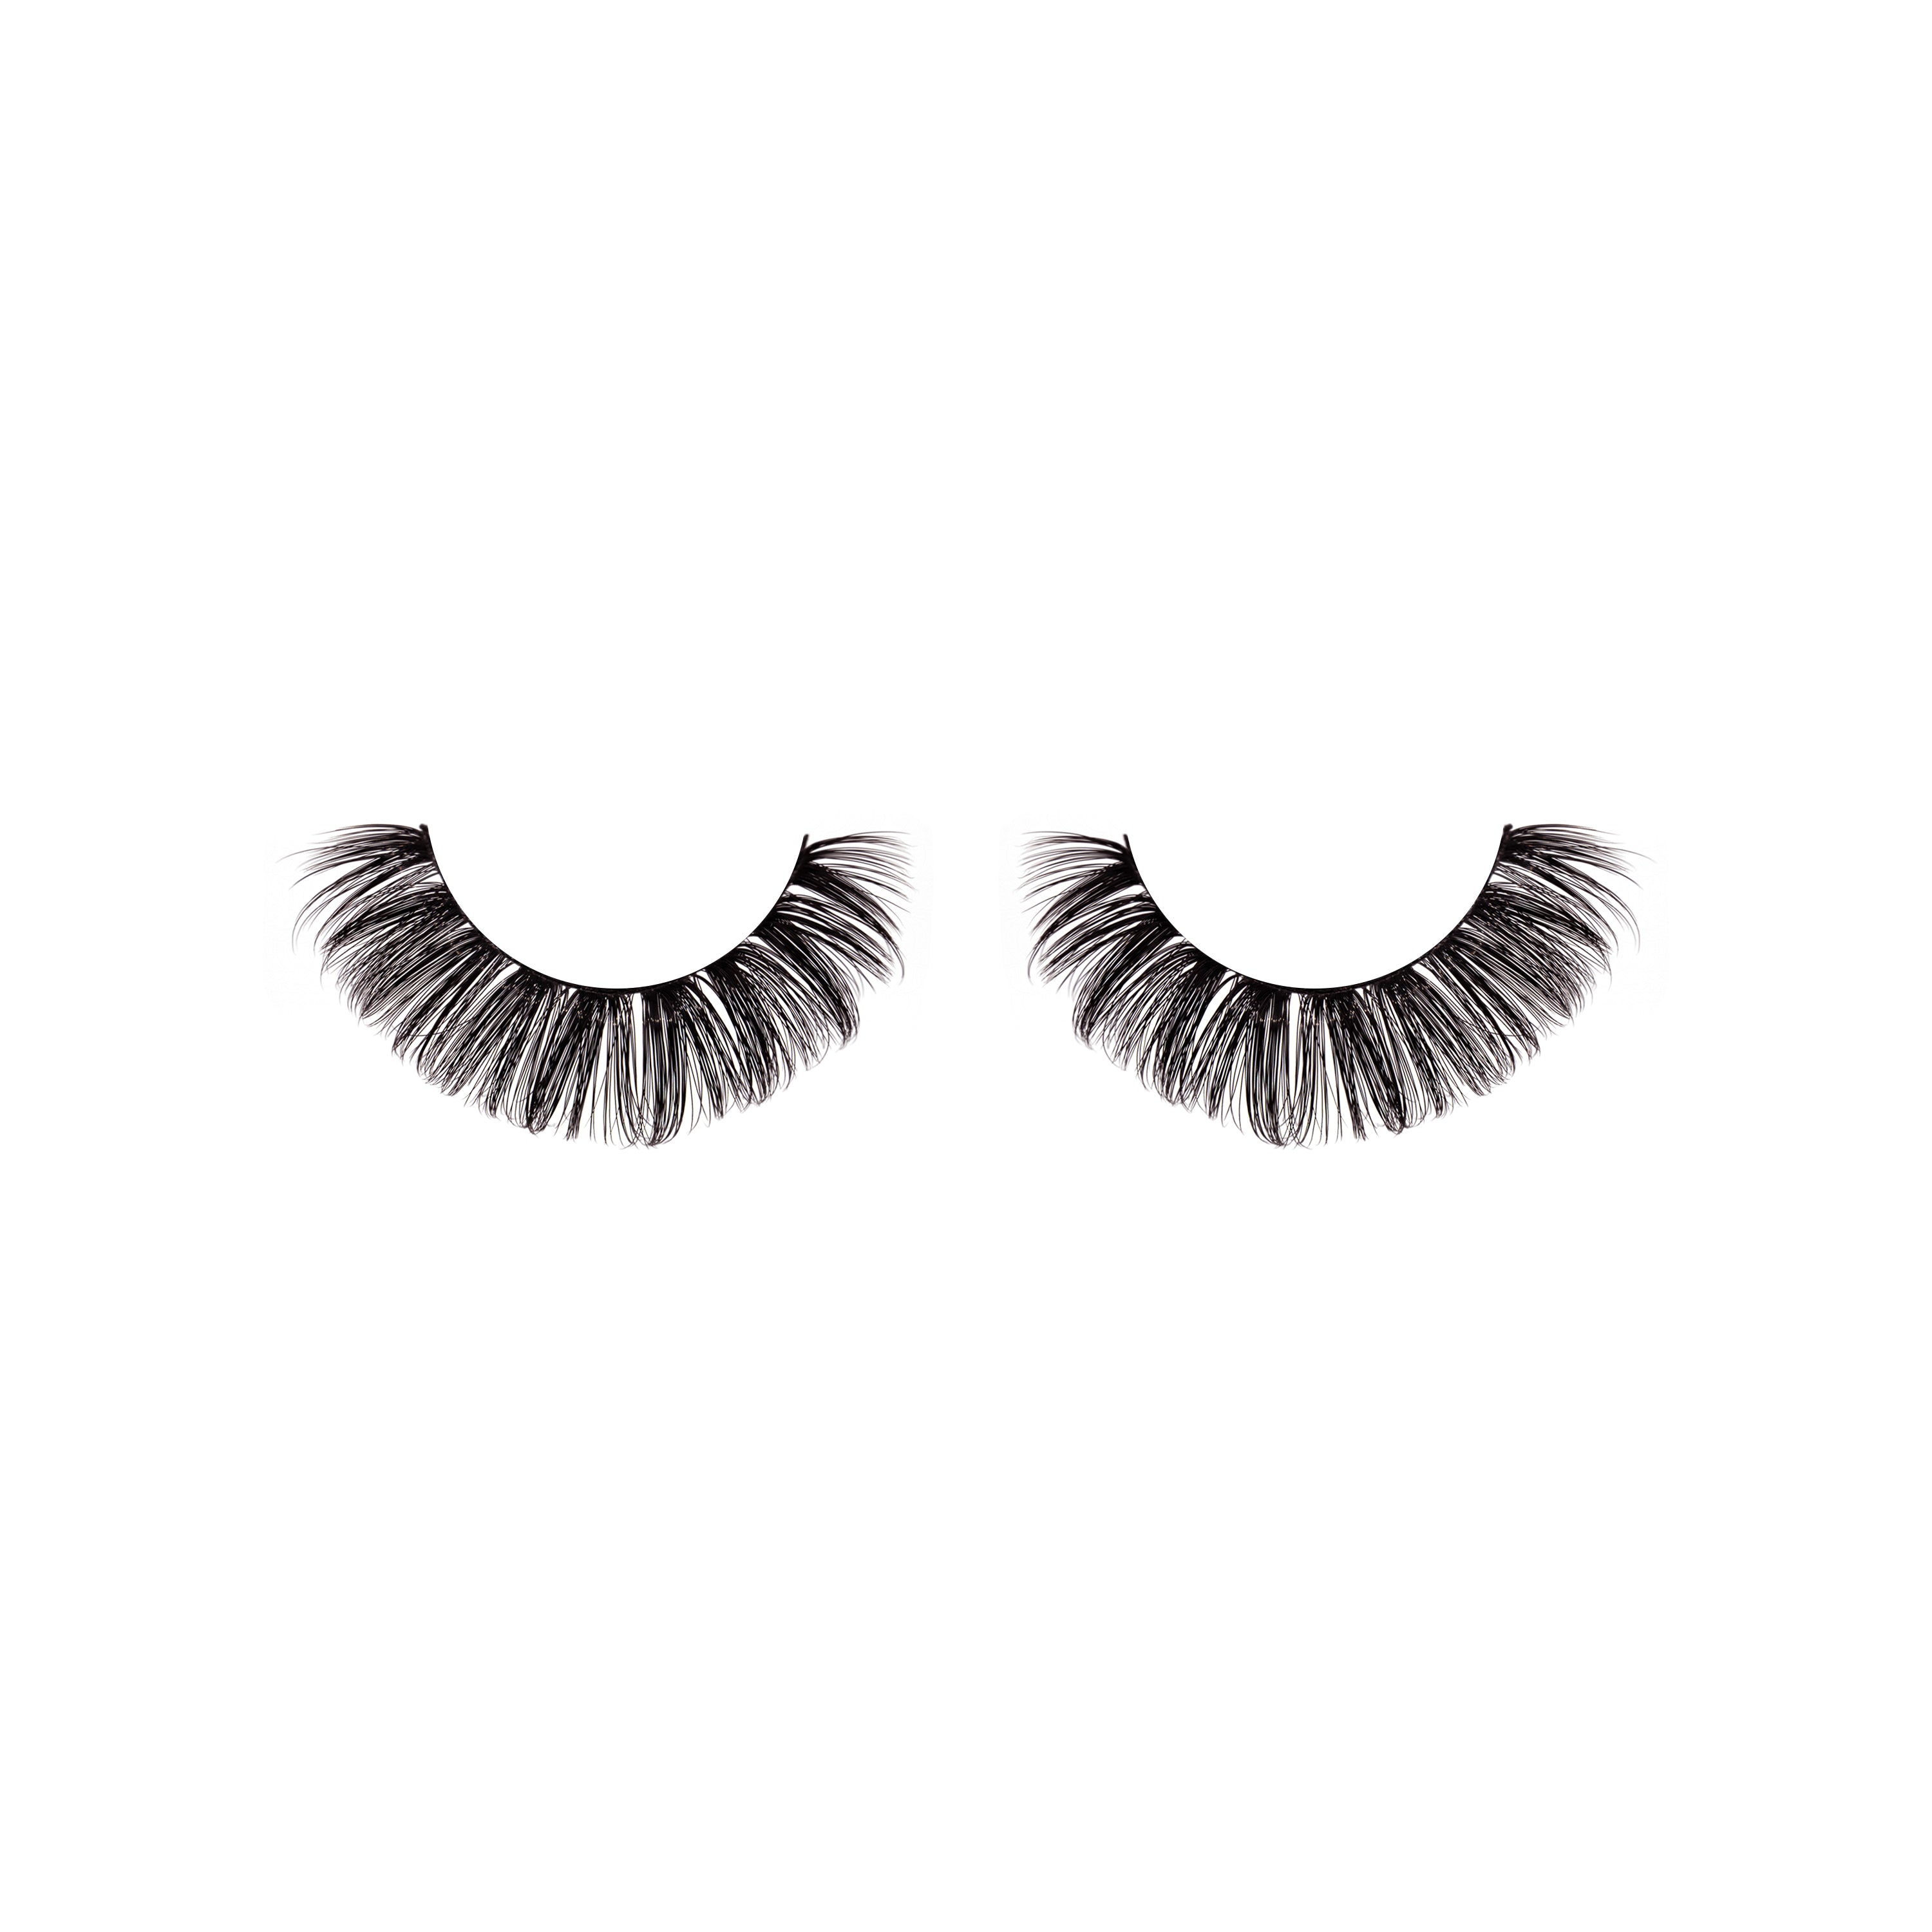 THE ULTIMATE STRIP LASH - DOLLY